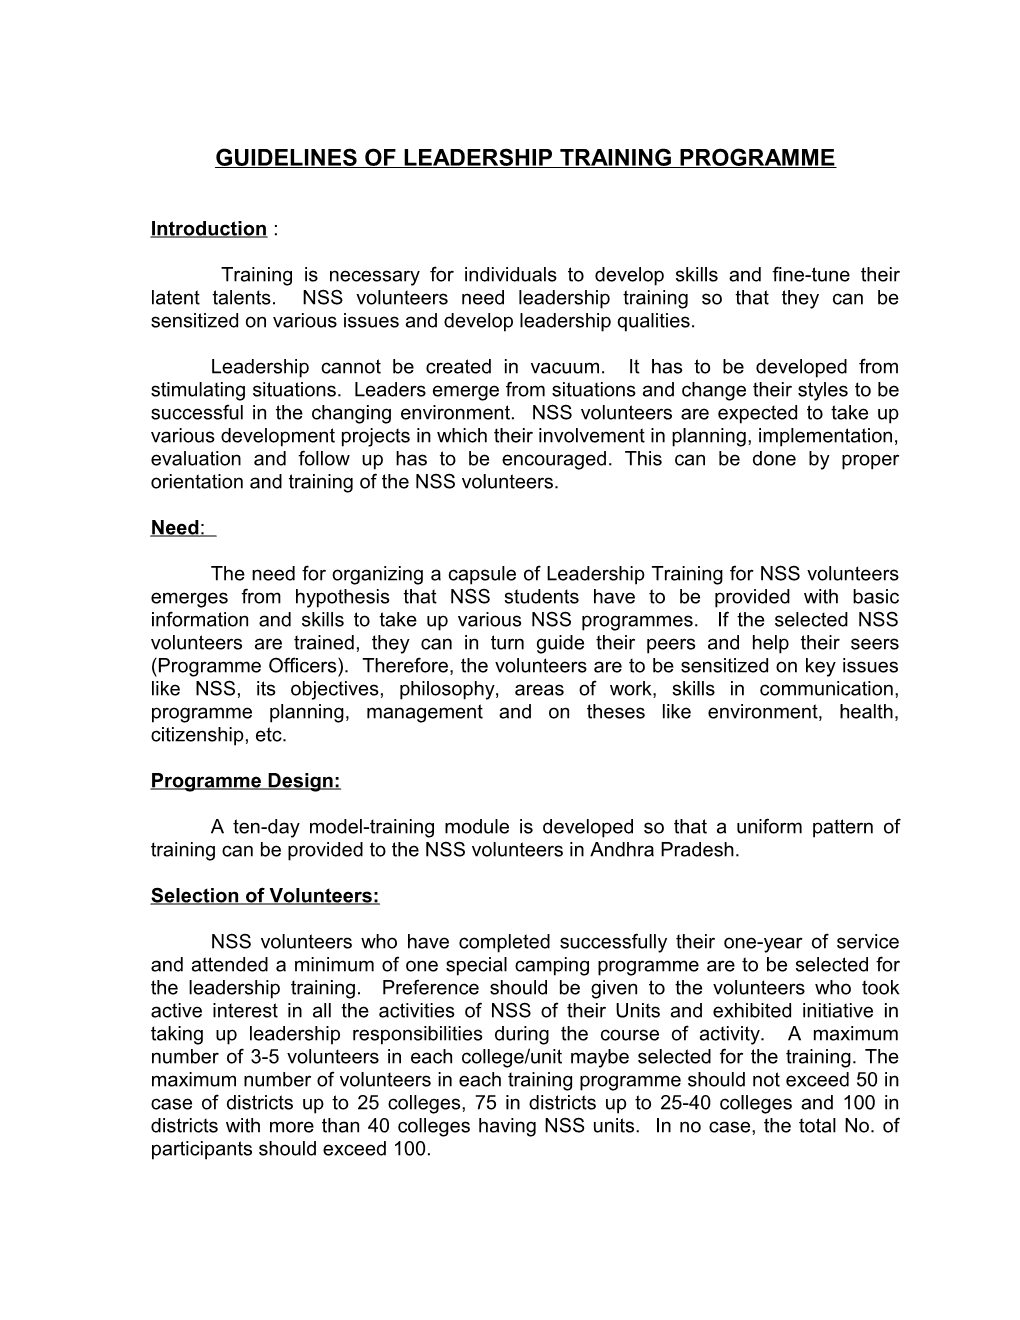 Guidelines of Leadership Training Programme